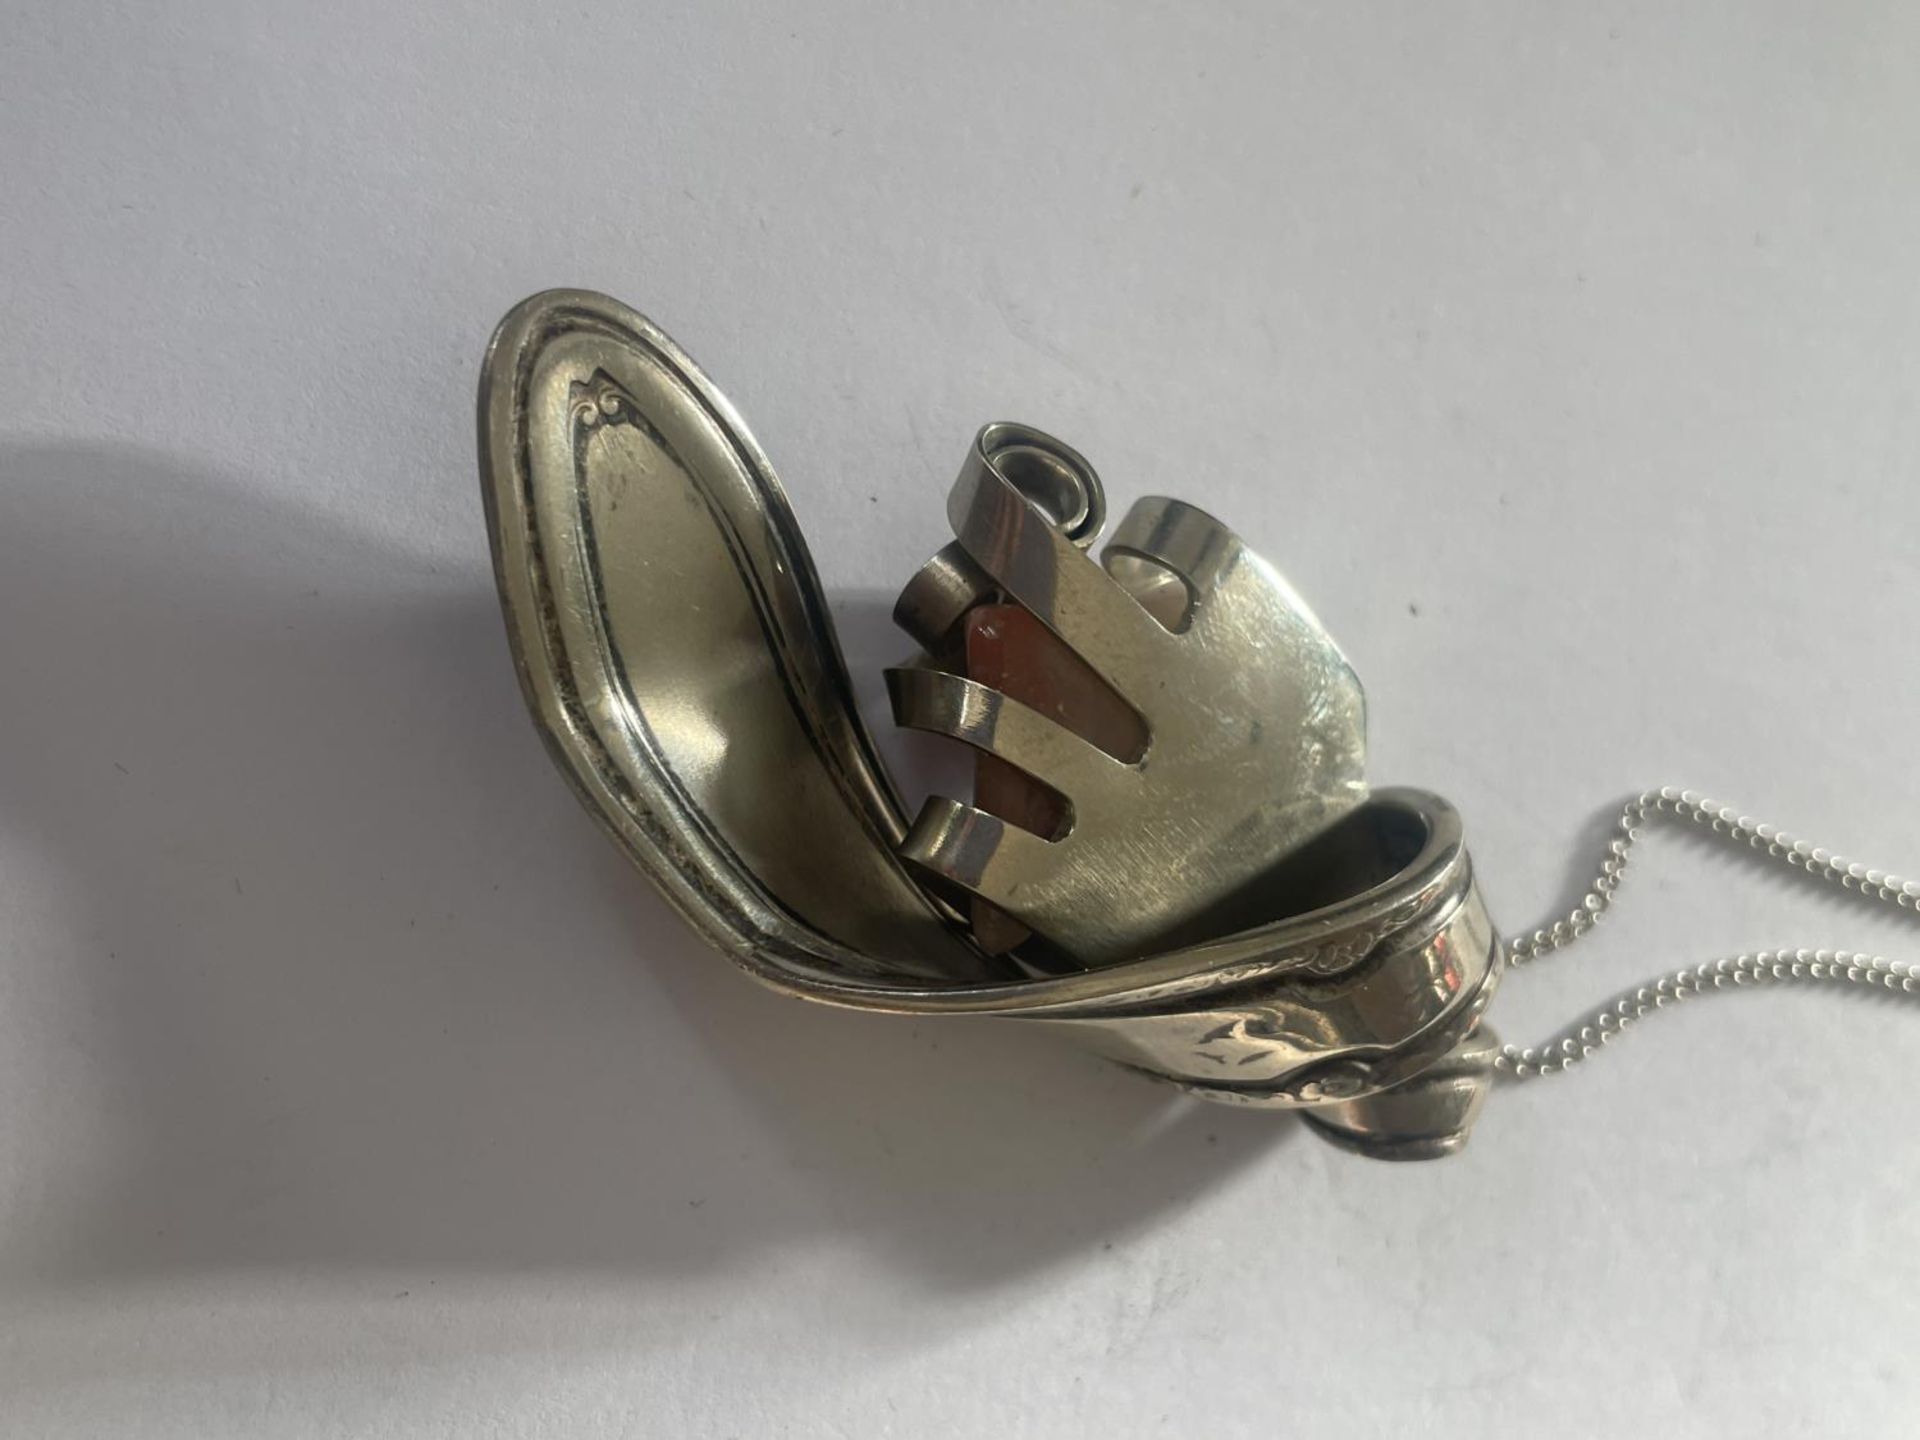 AN ORNATE WHITE METAL SPOON AND AGATE PENDANT - Image 4 of 4